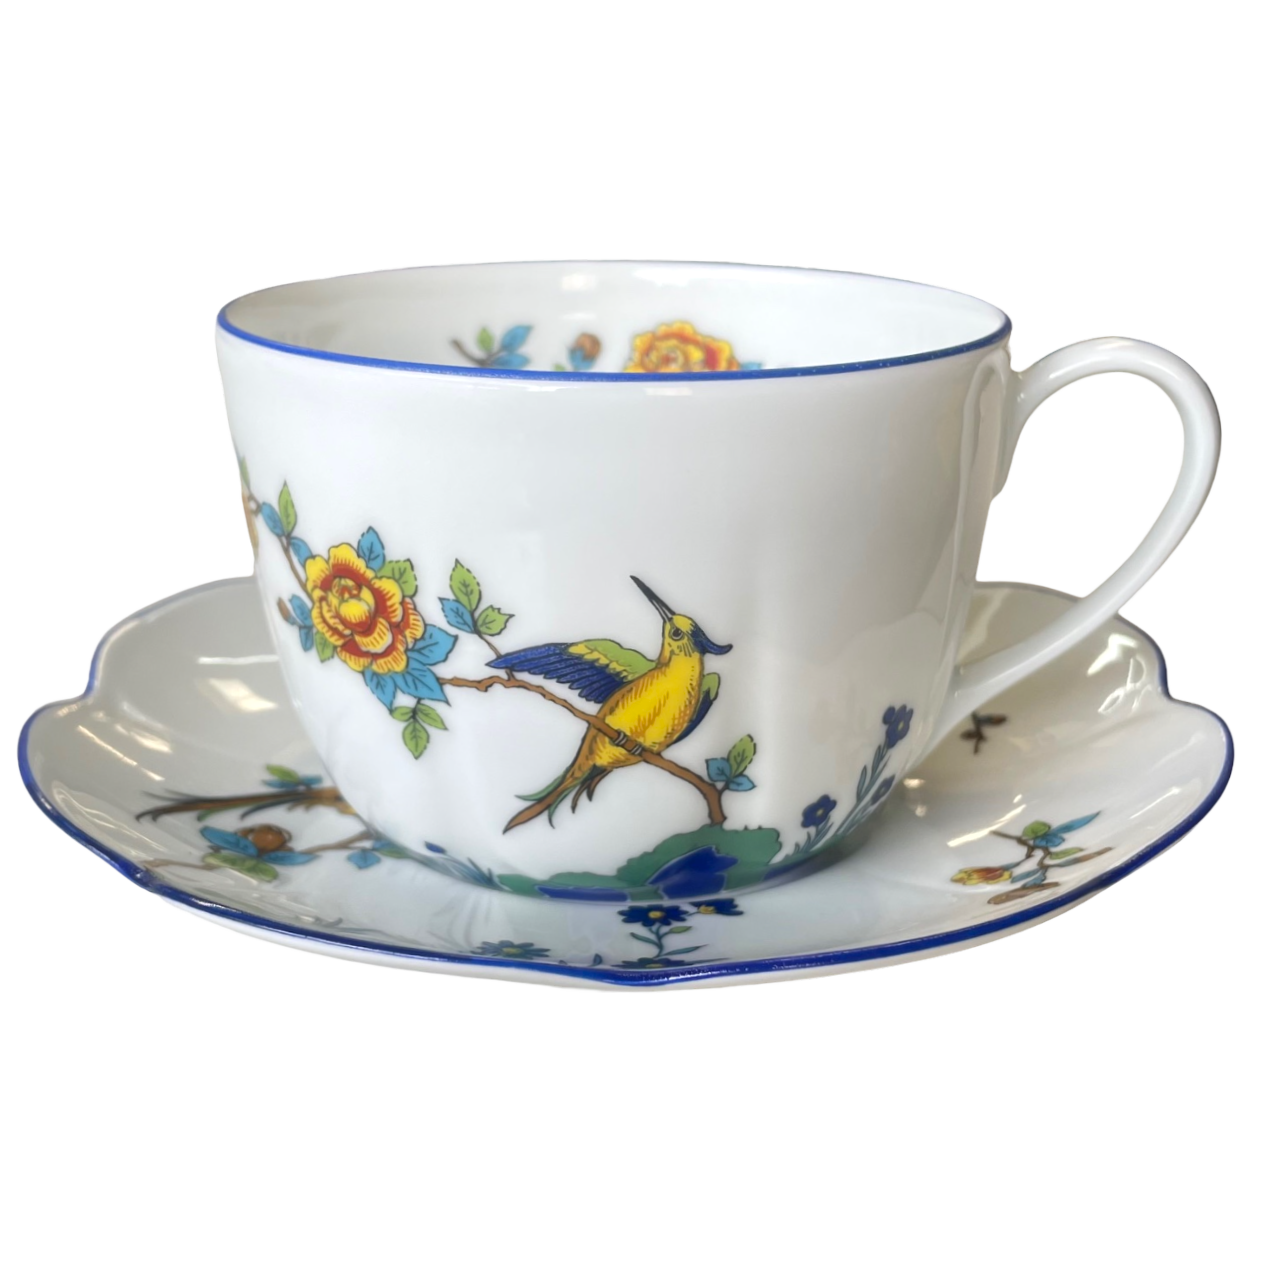 Indiana - Breakfast cup and saucer 0.45 litre